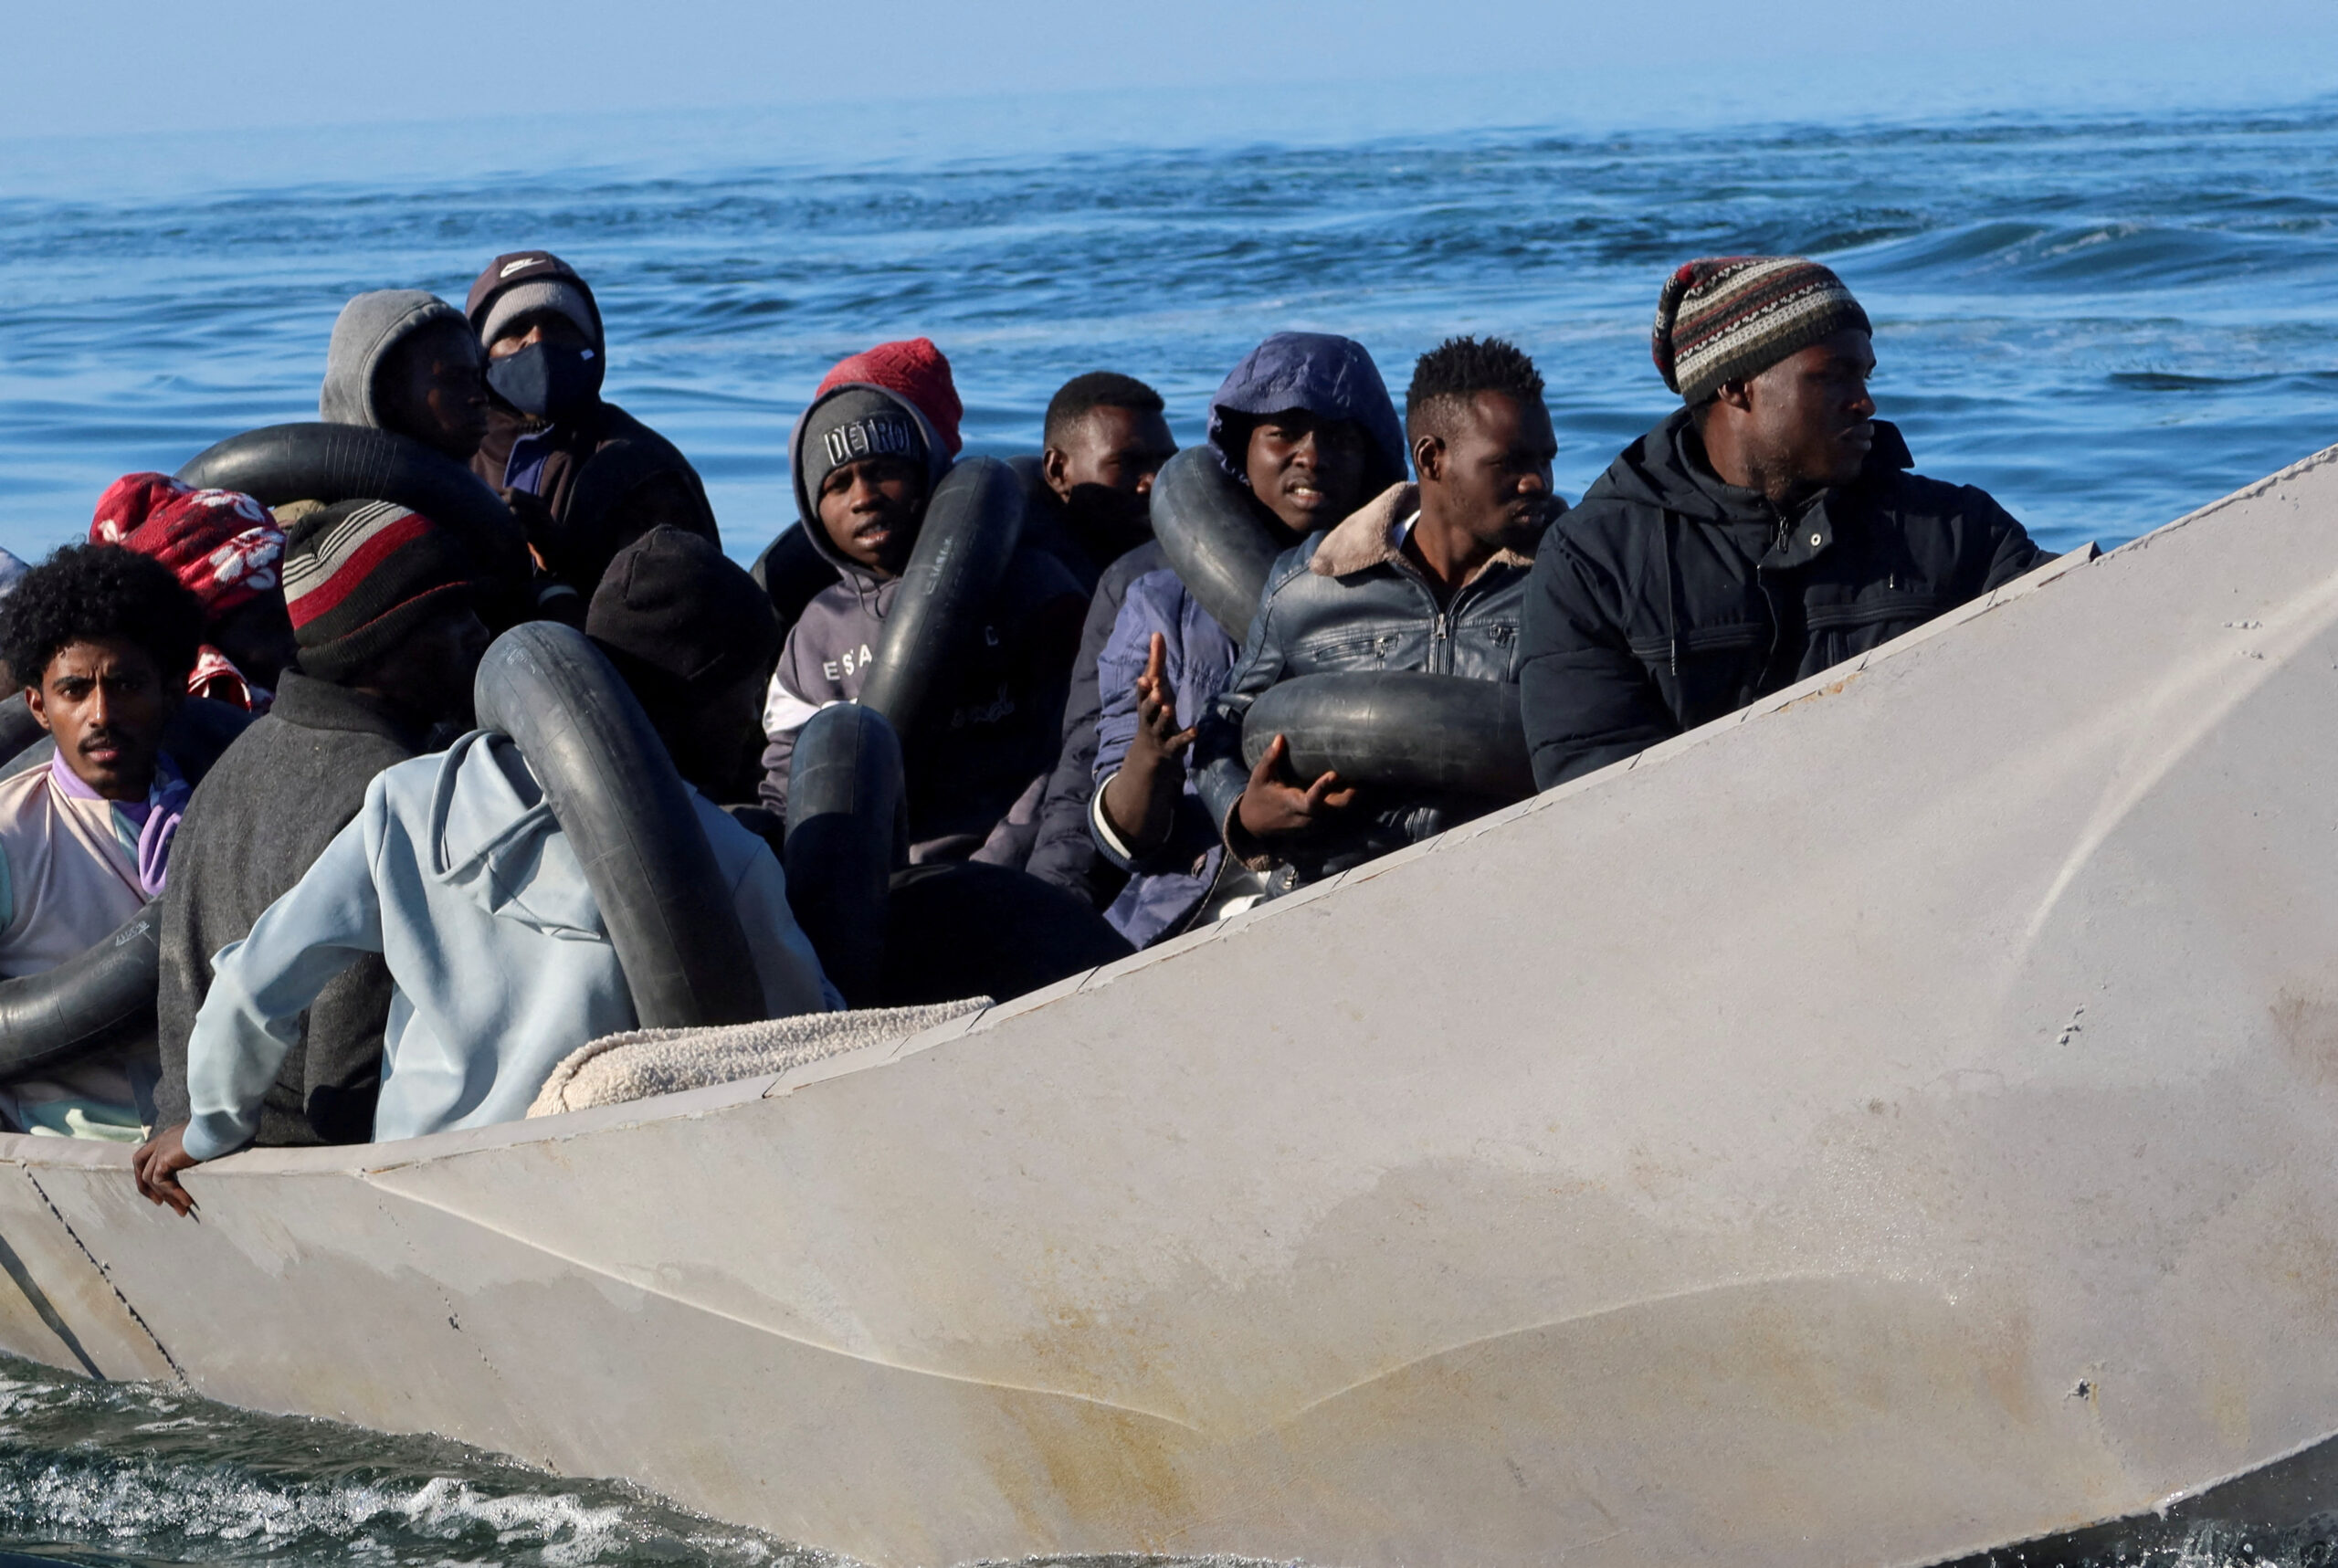 Italy migration summit aims to help Africa reduce migrant flows to Europe